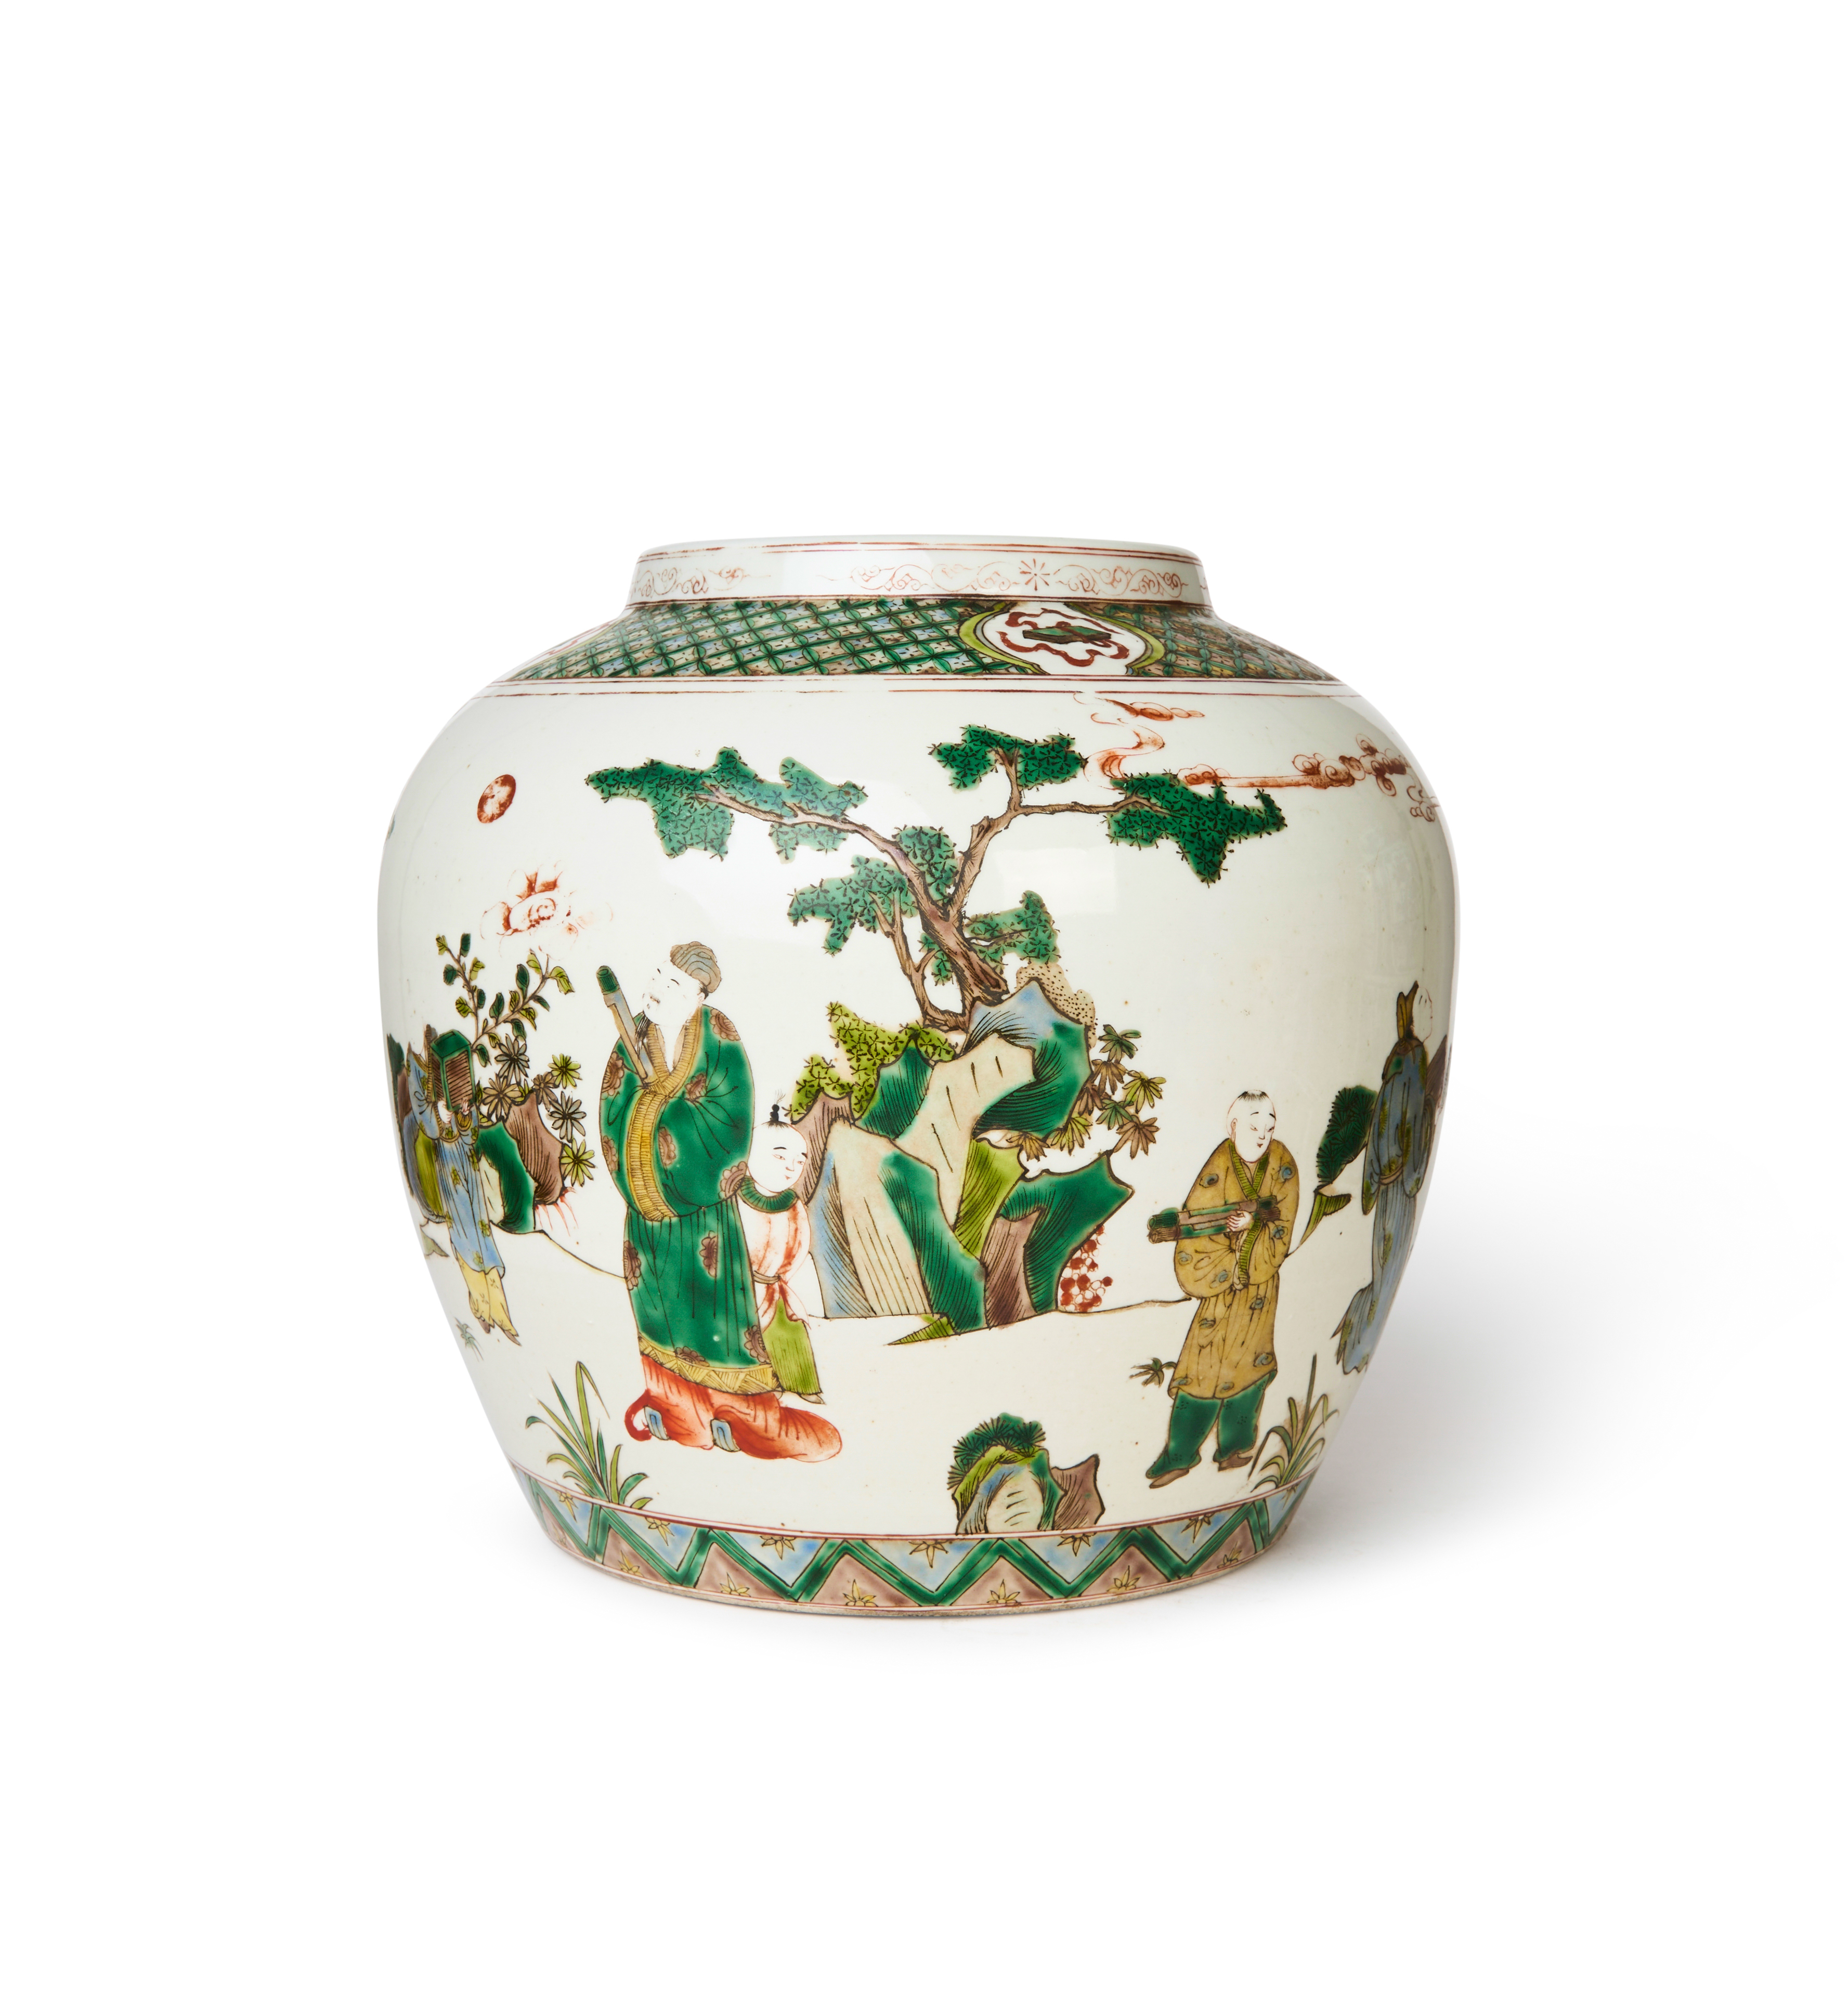 A LARGE CHINESE FAMILLE VERTE FIGURAL JAR, QING DYNASTY (1644-1911)